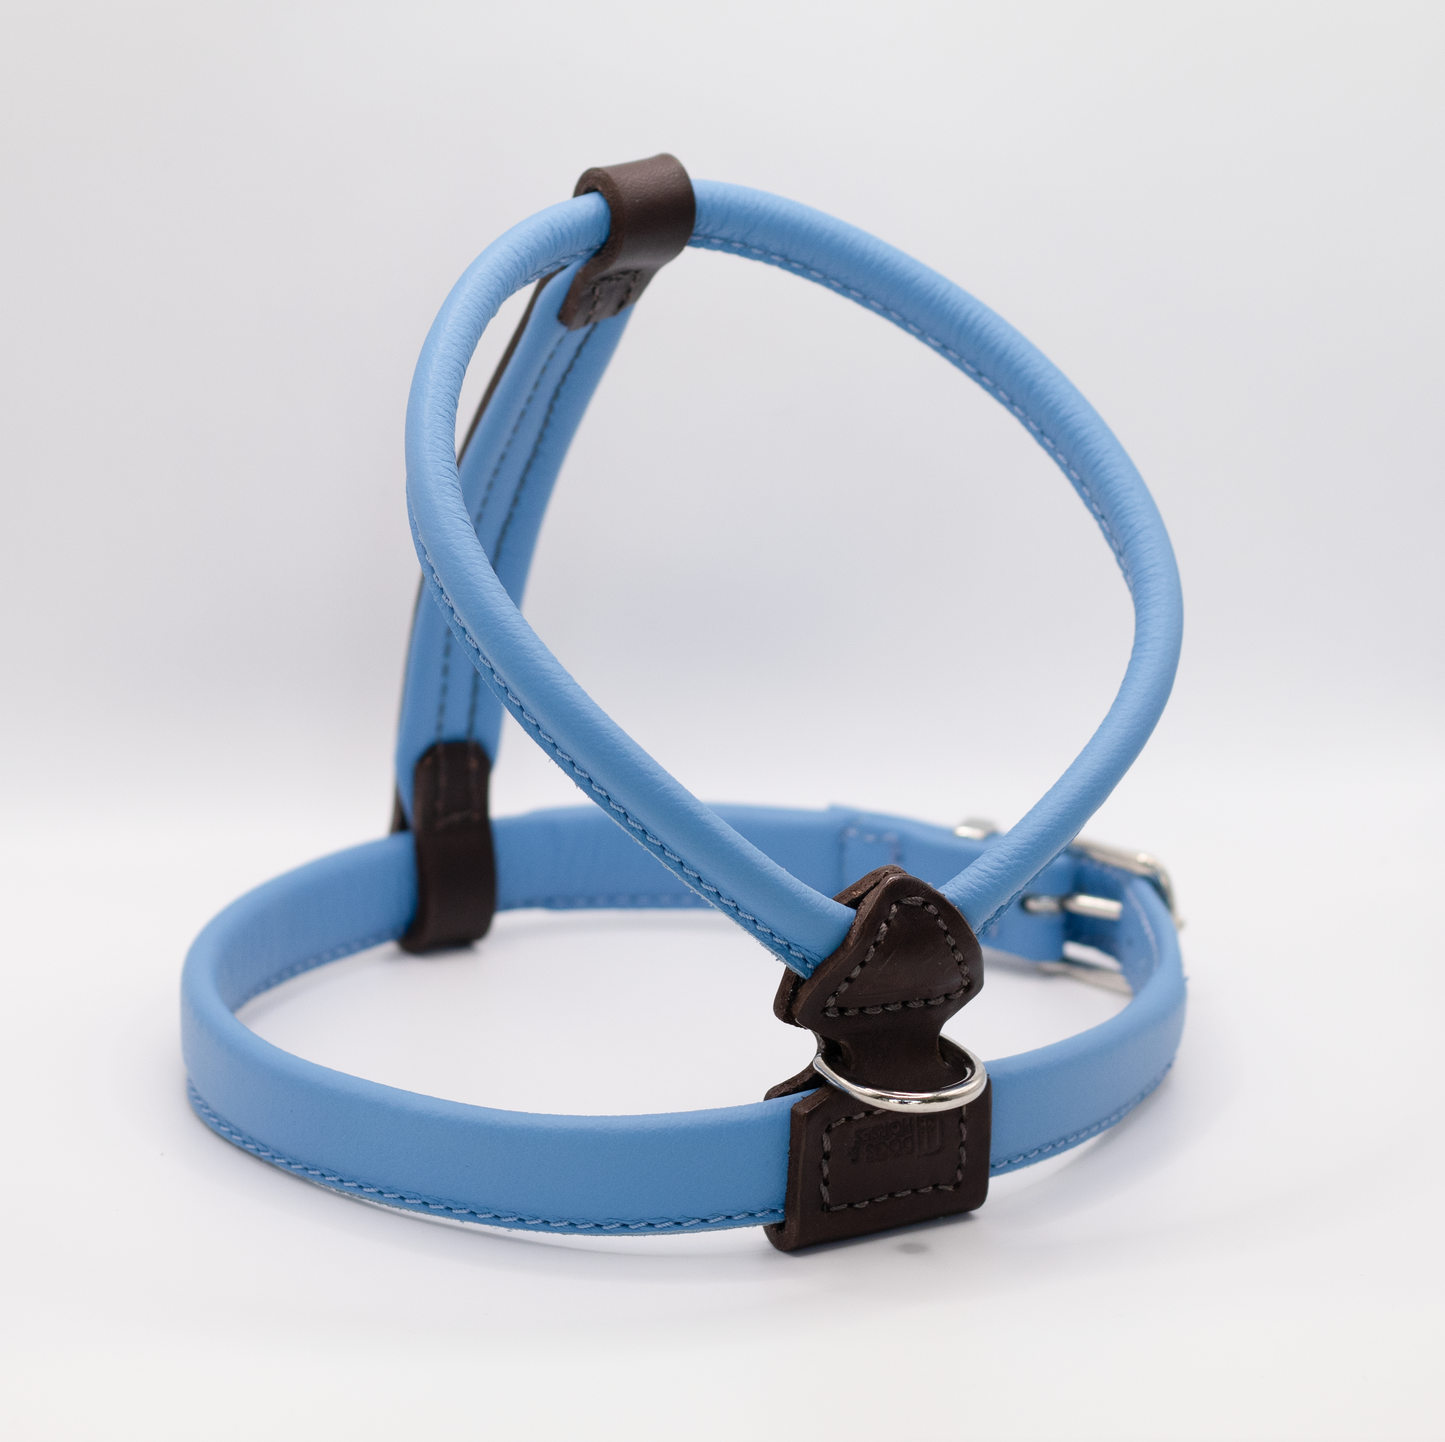 French Bulldog Leather Harness Blue